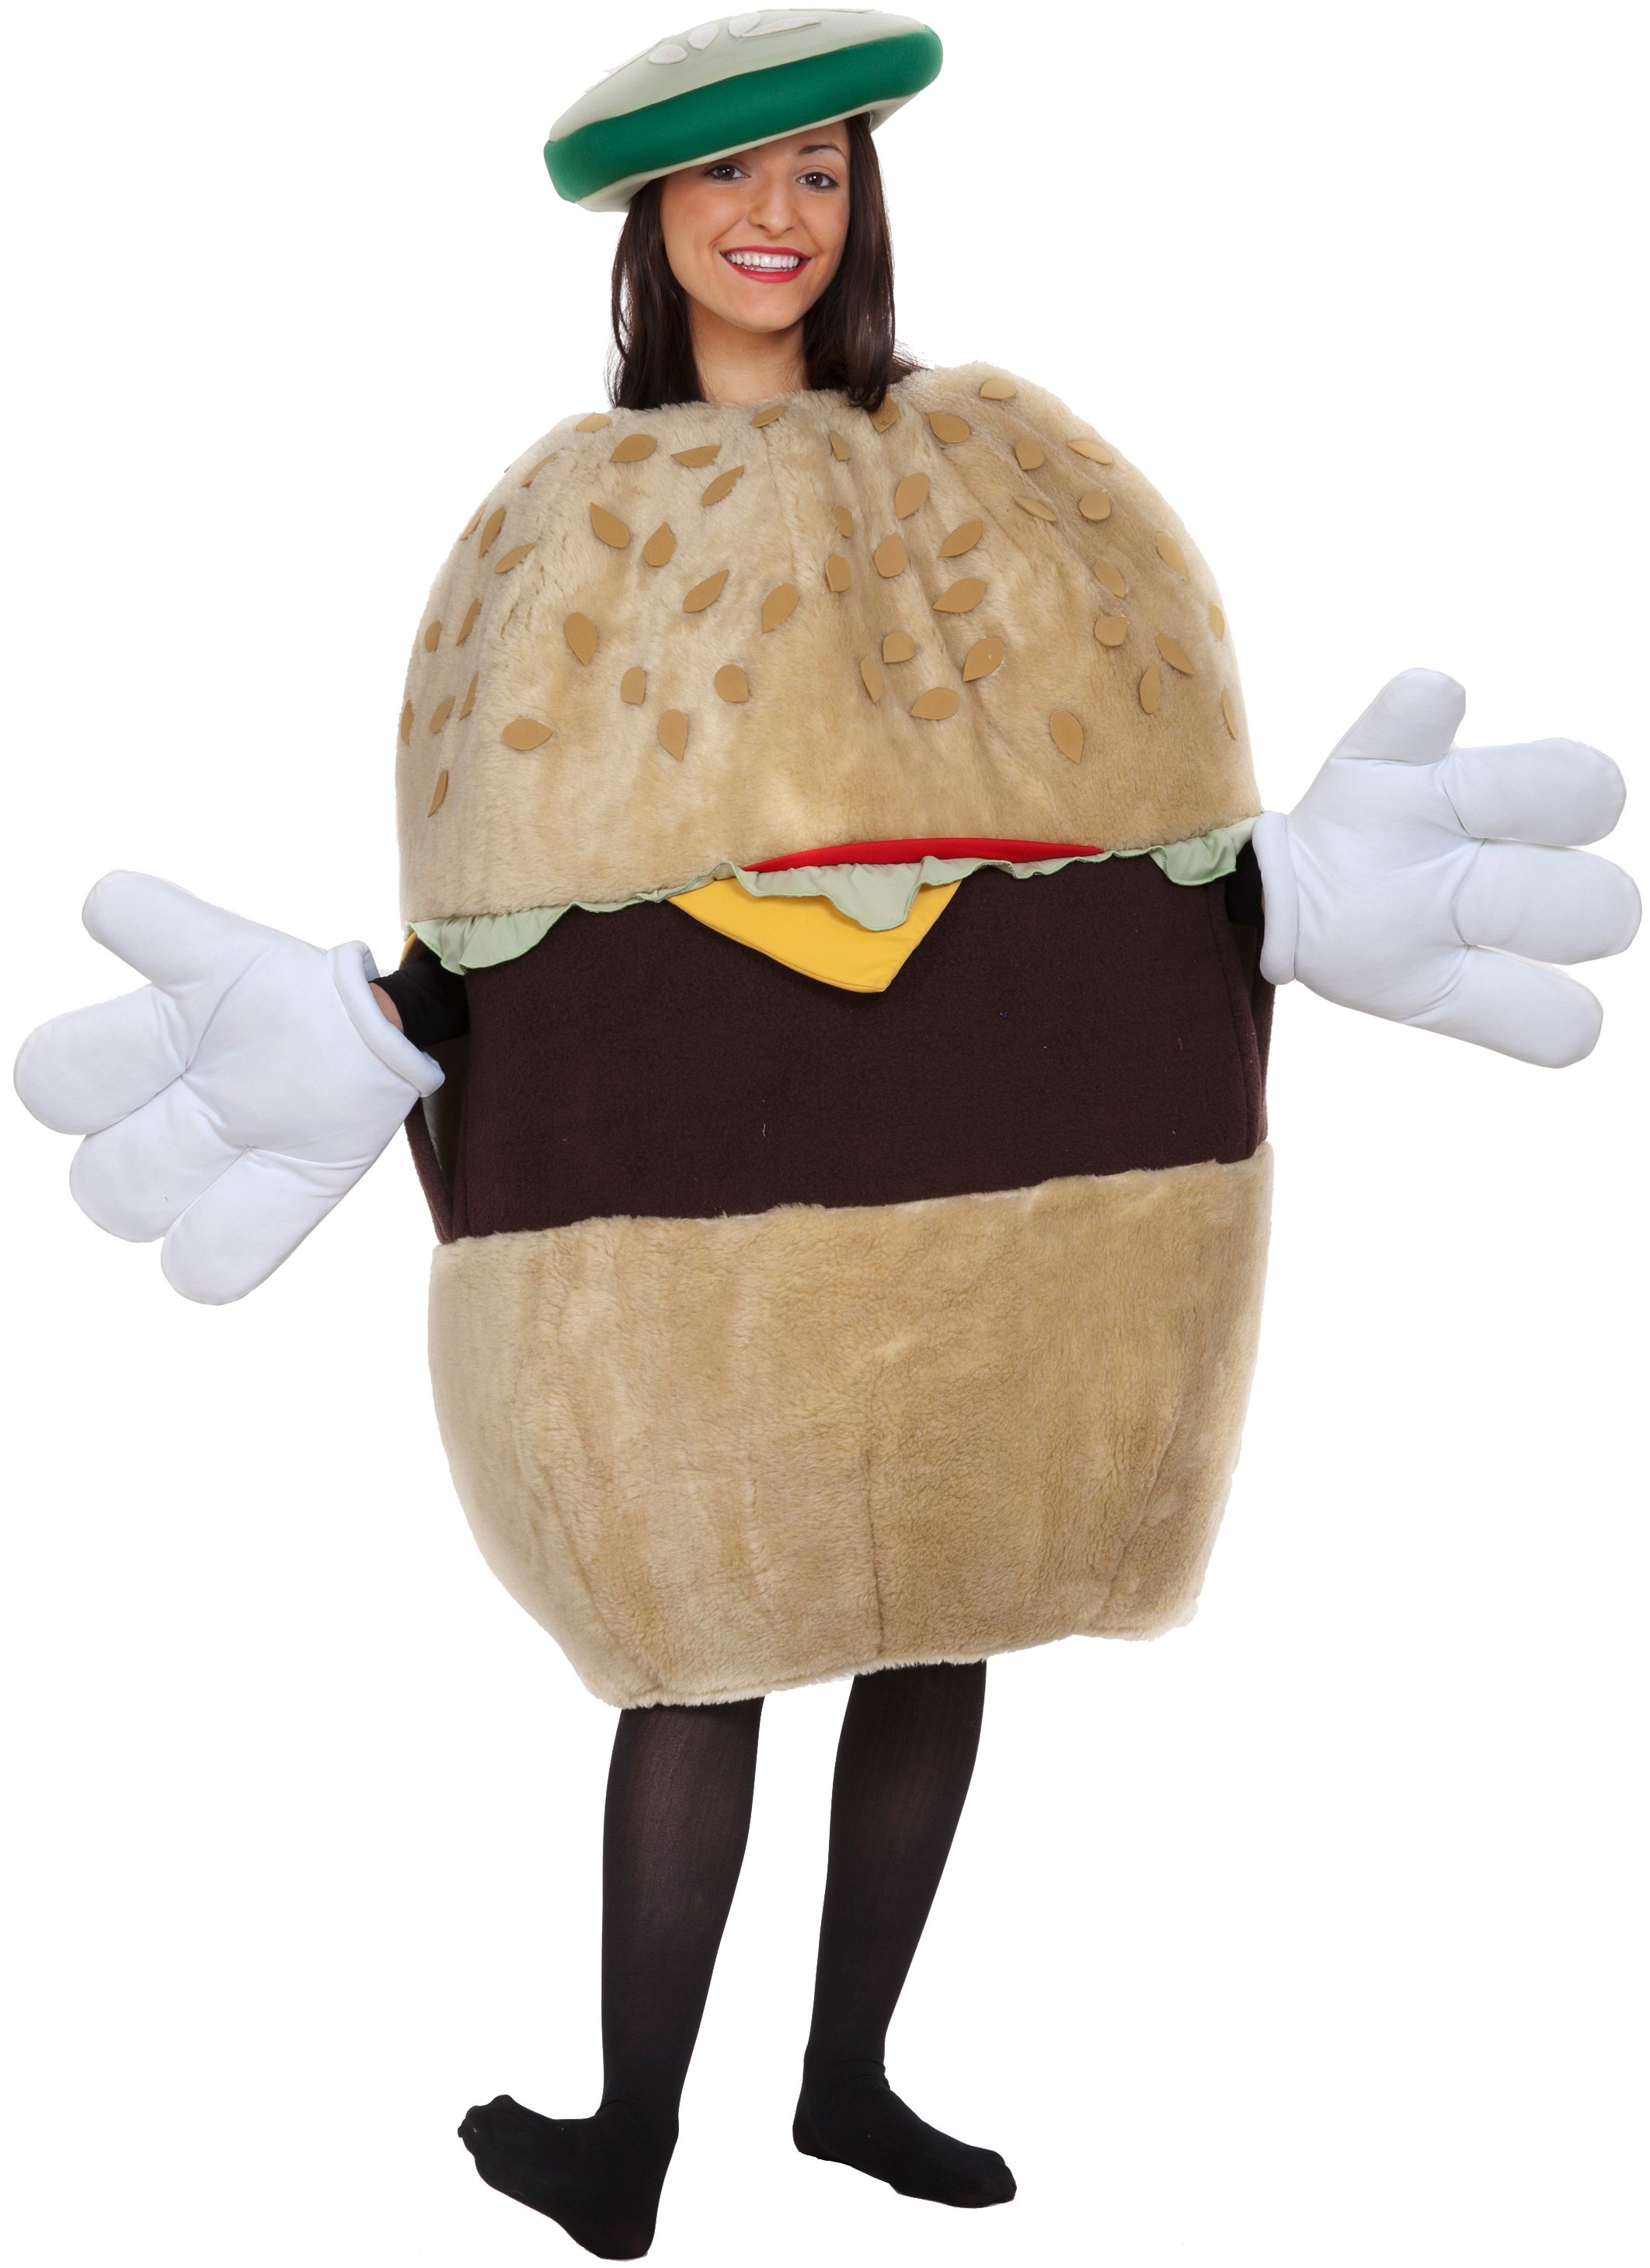 Cheeseburger Adult Costume - Click Image to Close